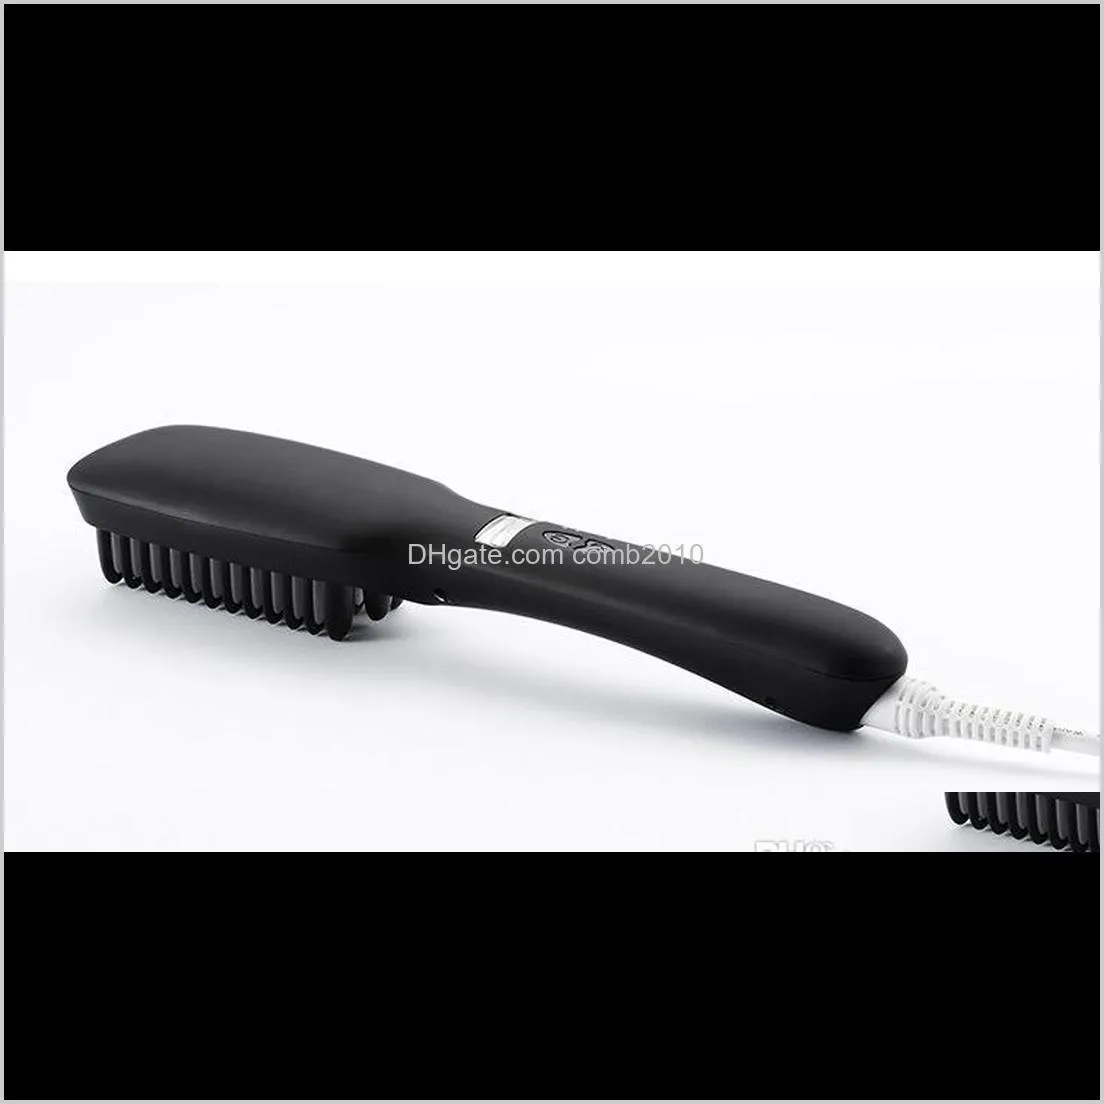 new 2 in 1 brush hair straightener comb irons with lcd display 100-240v electric straight hair comb straightening brush 40pcs